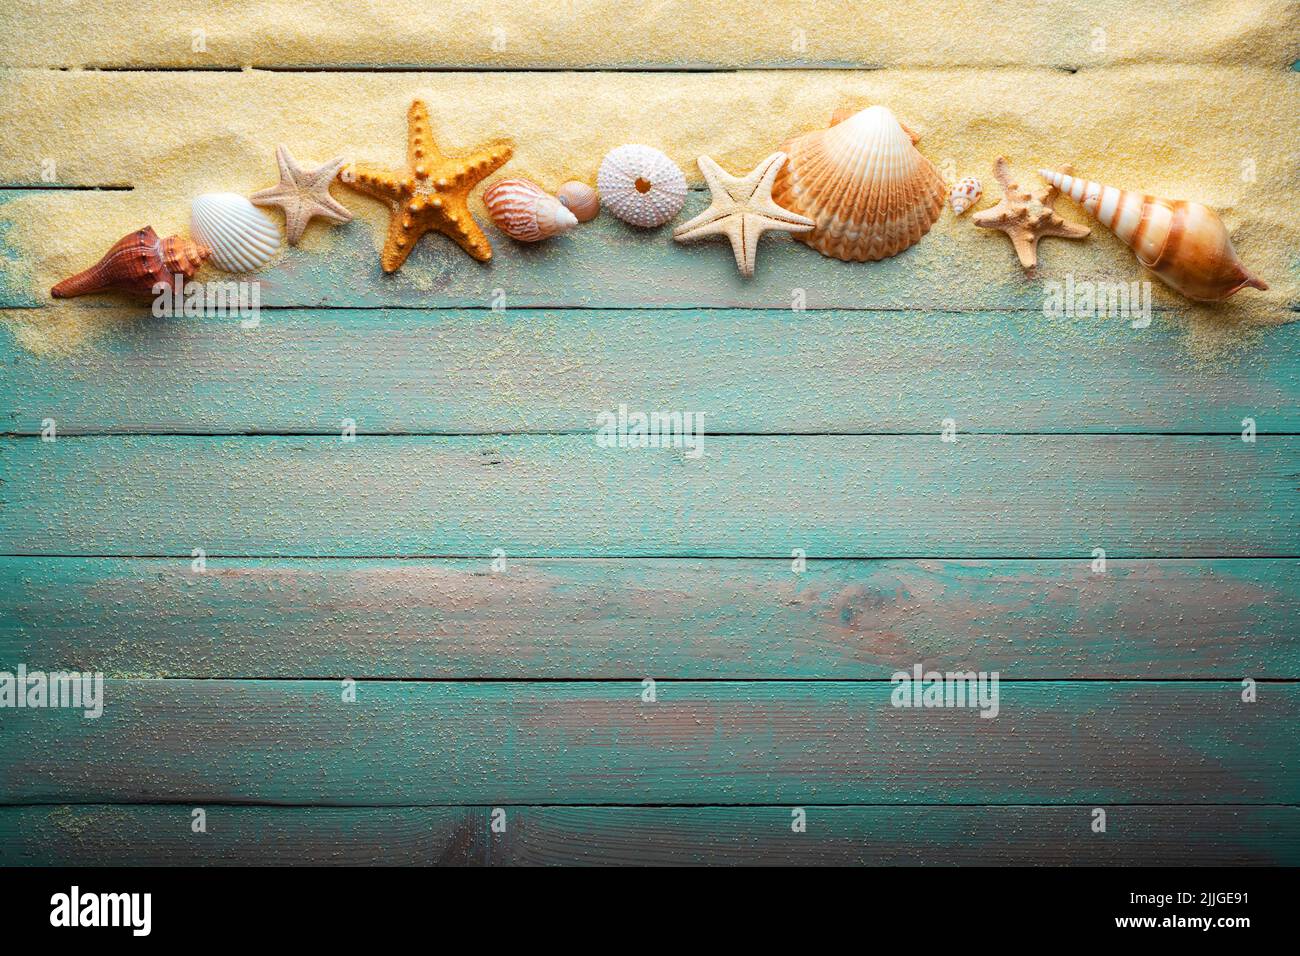 Vacations and summer time concept with starfish and sea shells on a turquoise wooden table with sand Stock Photo